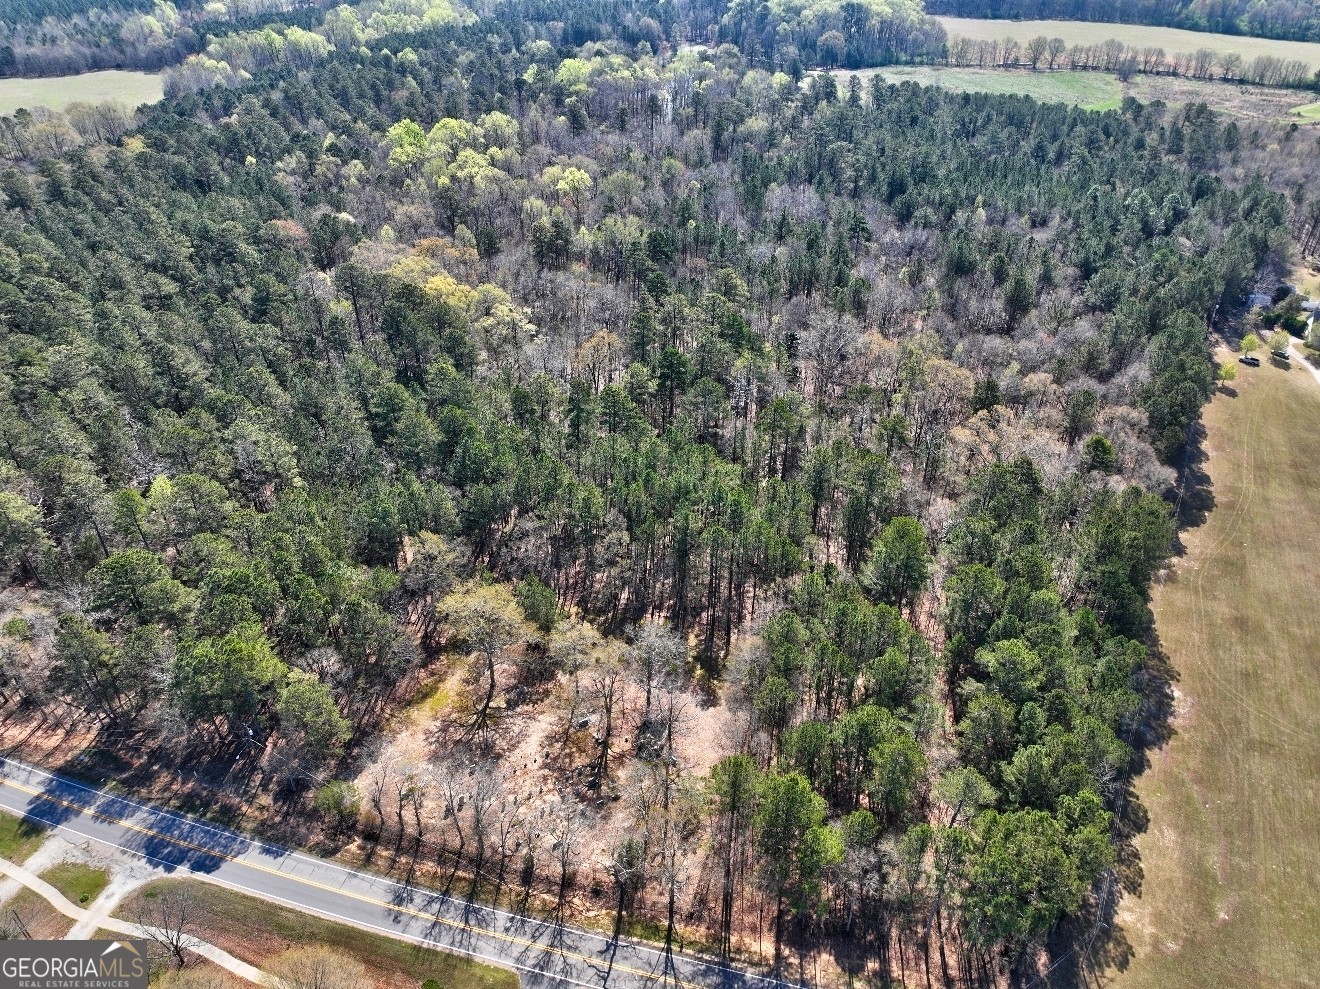 2. 205 Highway 186 Tract 2